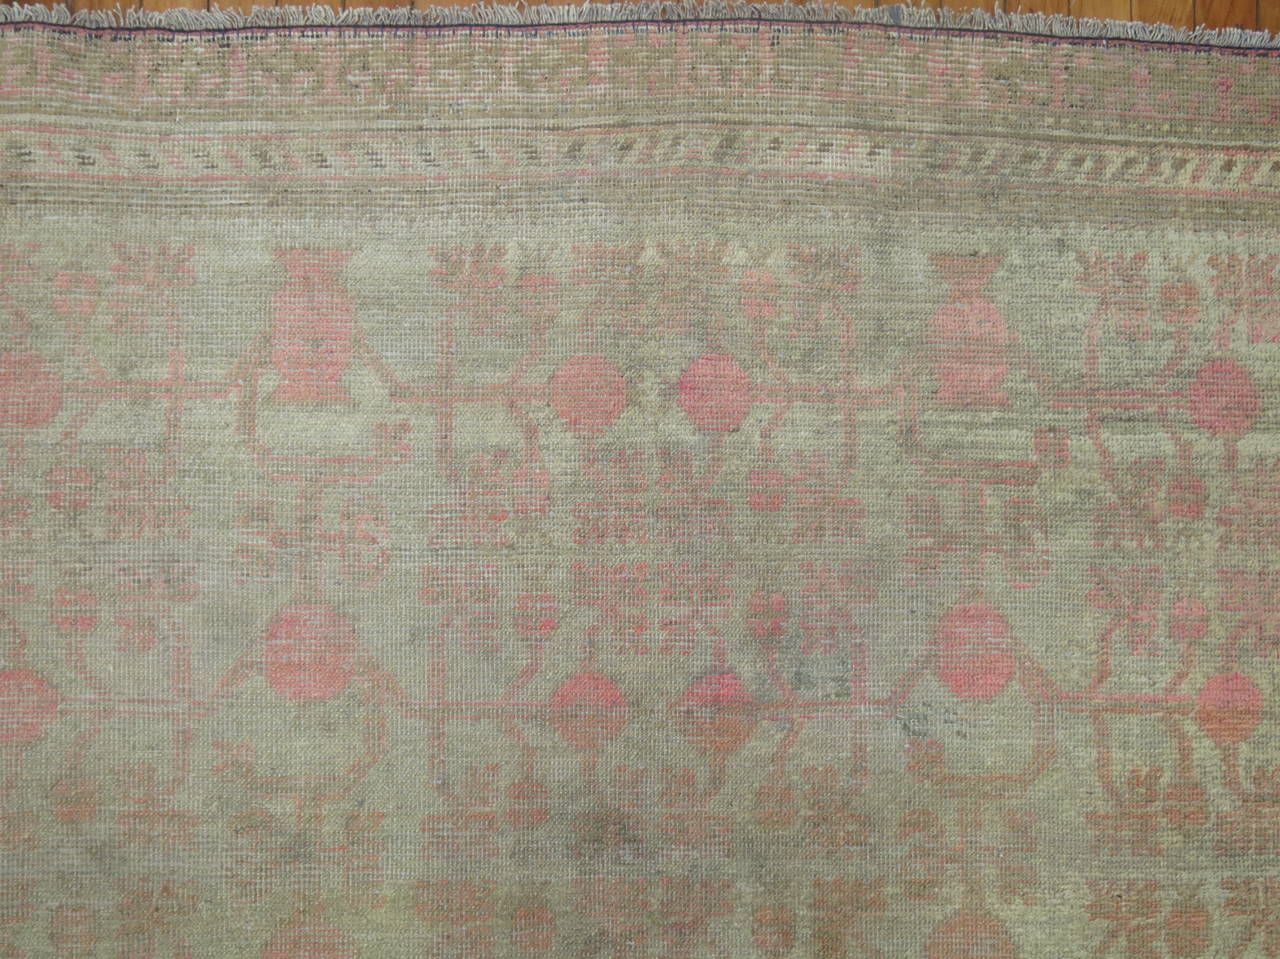 An early 20th century Decorative Khotan rug, shades of silver and pink.